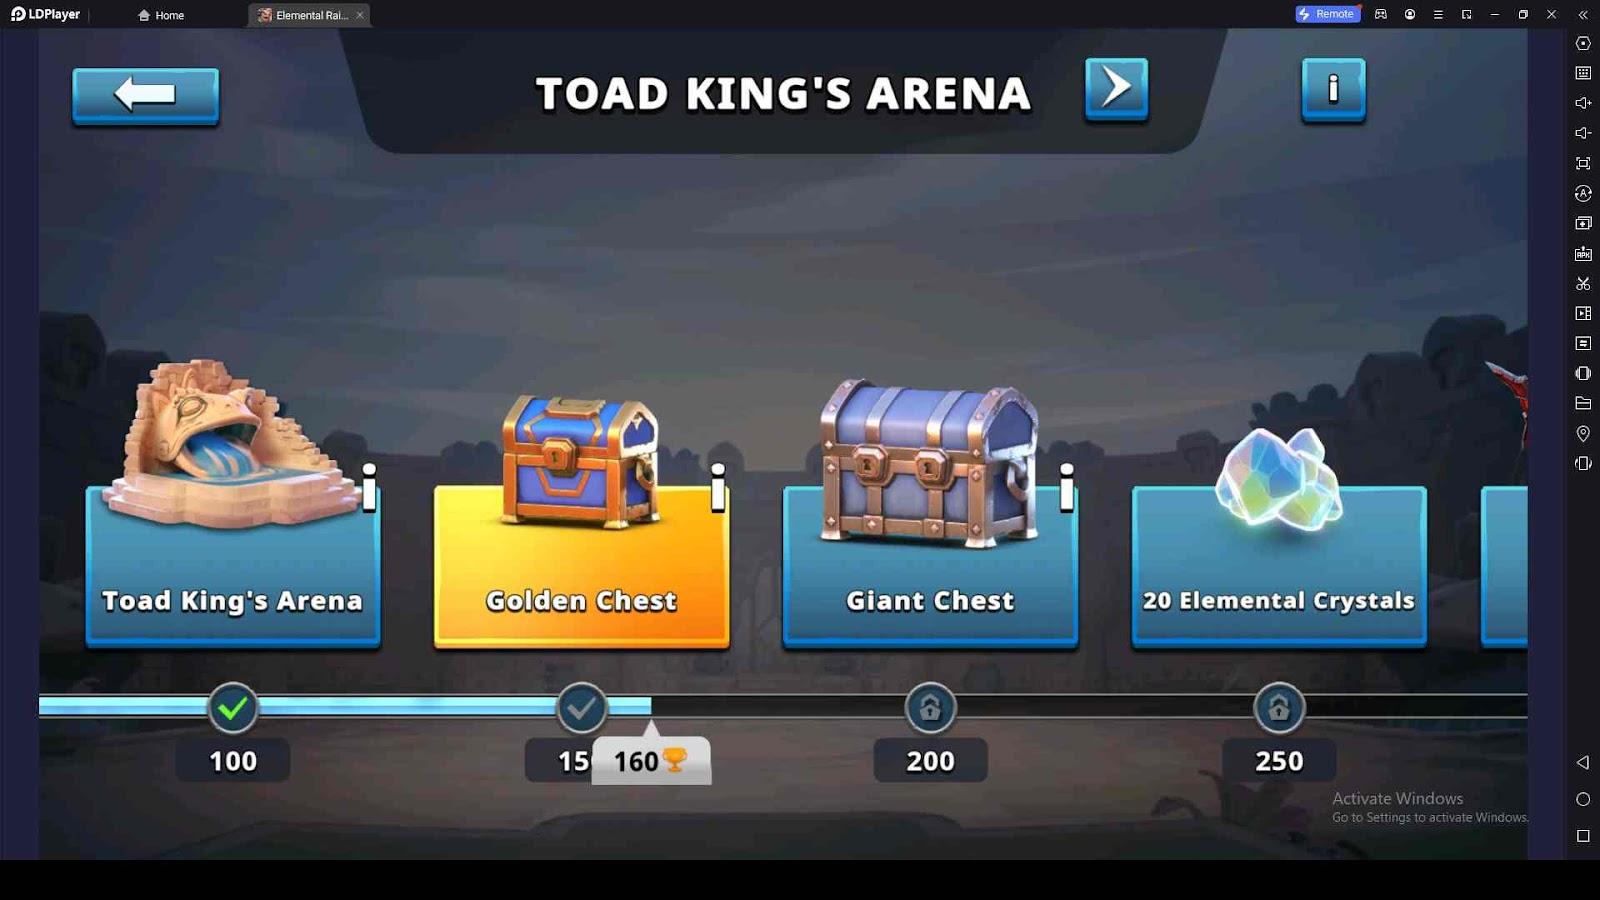 Elemental Raiders Toad King’s Arena for Awesome Benefits